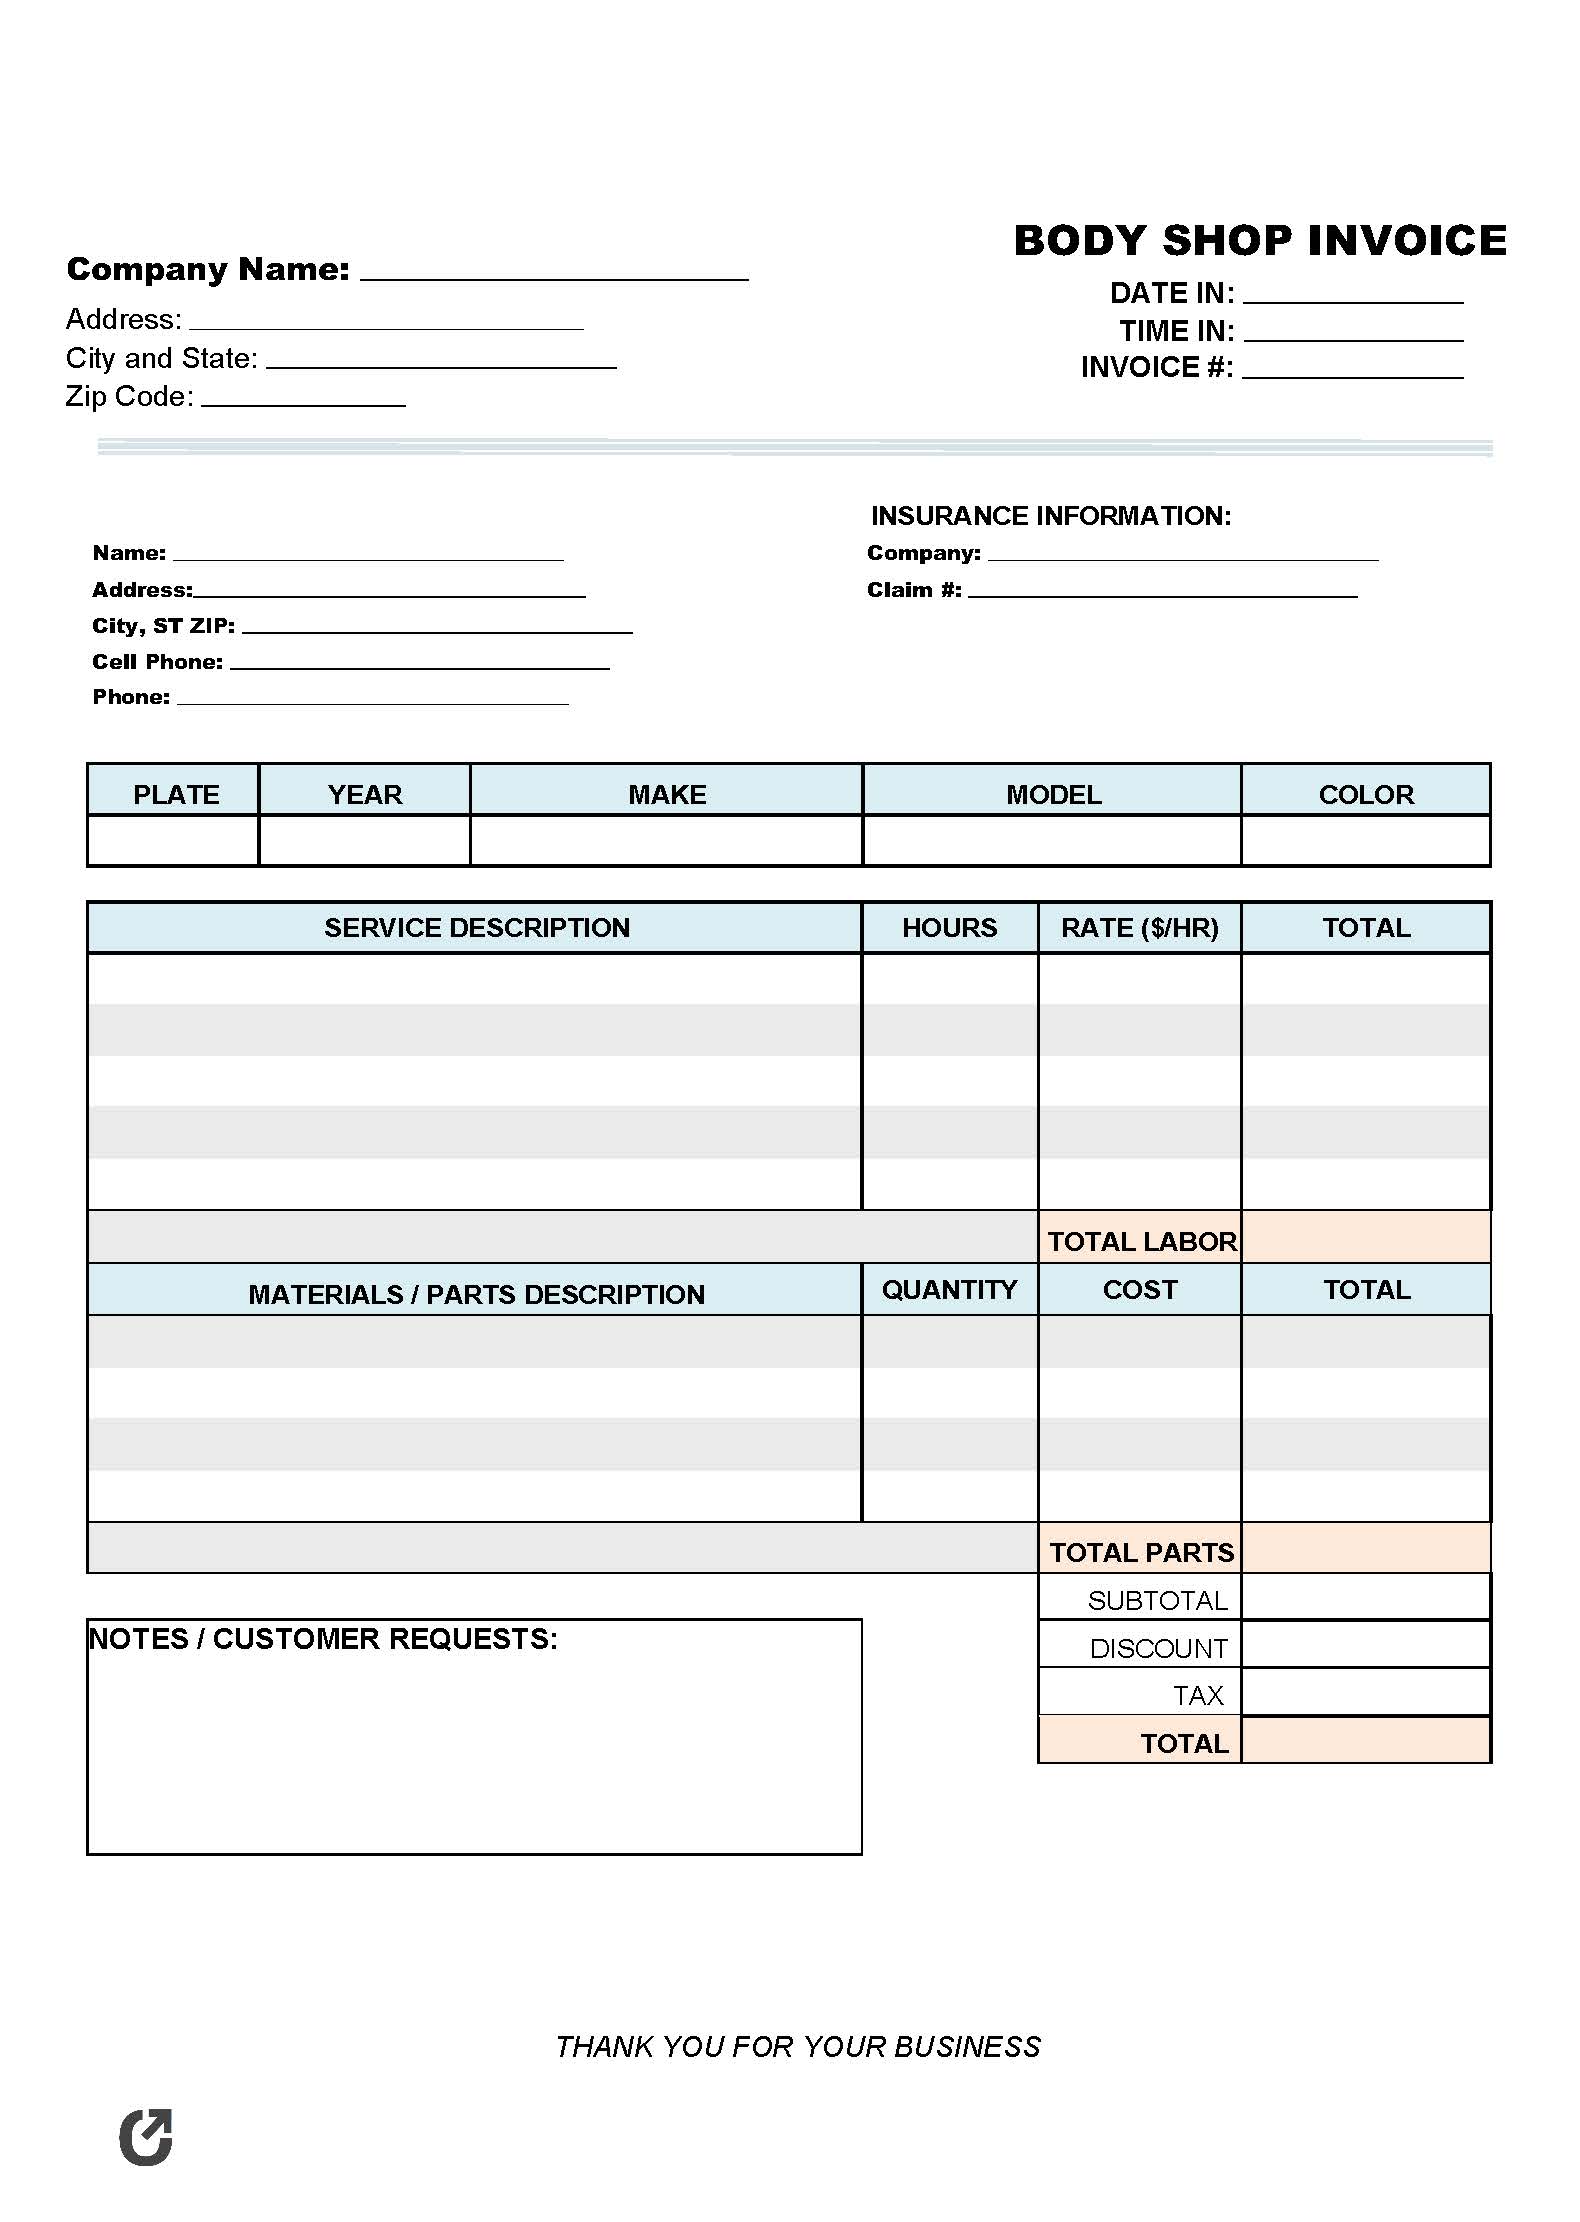 Free Body Shop Invoice Template  PDF  WORD  EXCEL With Towing Service Invoice Template